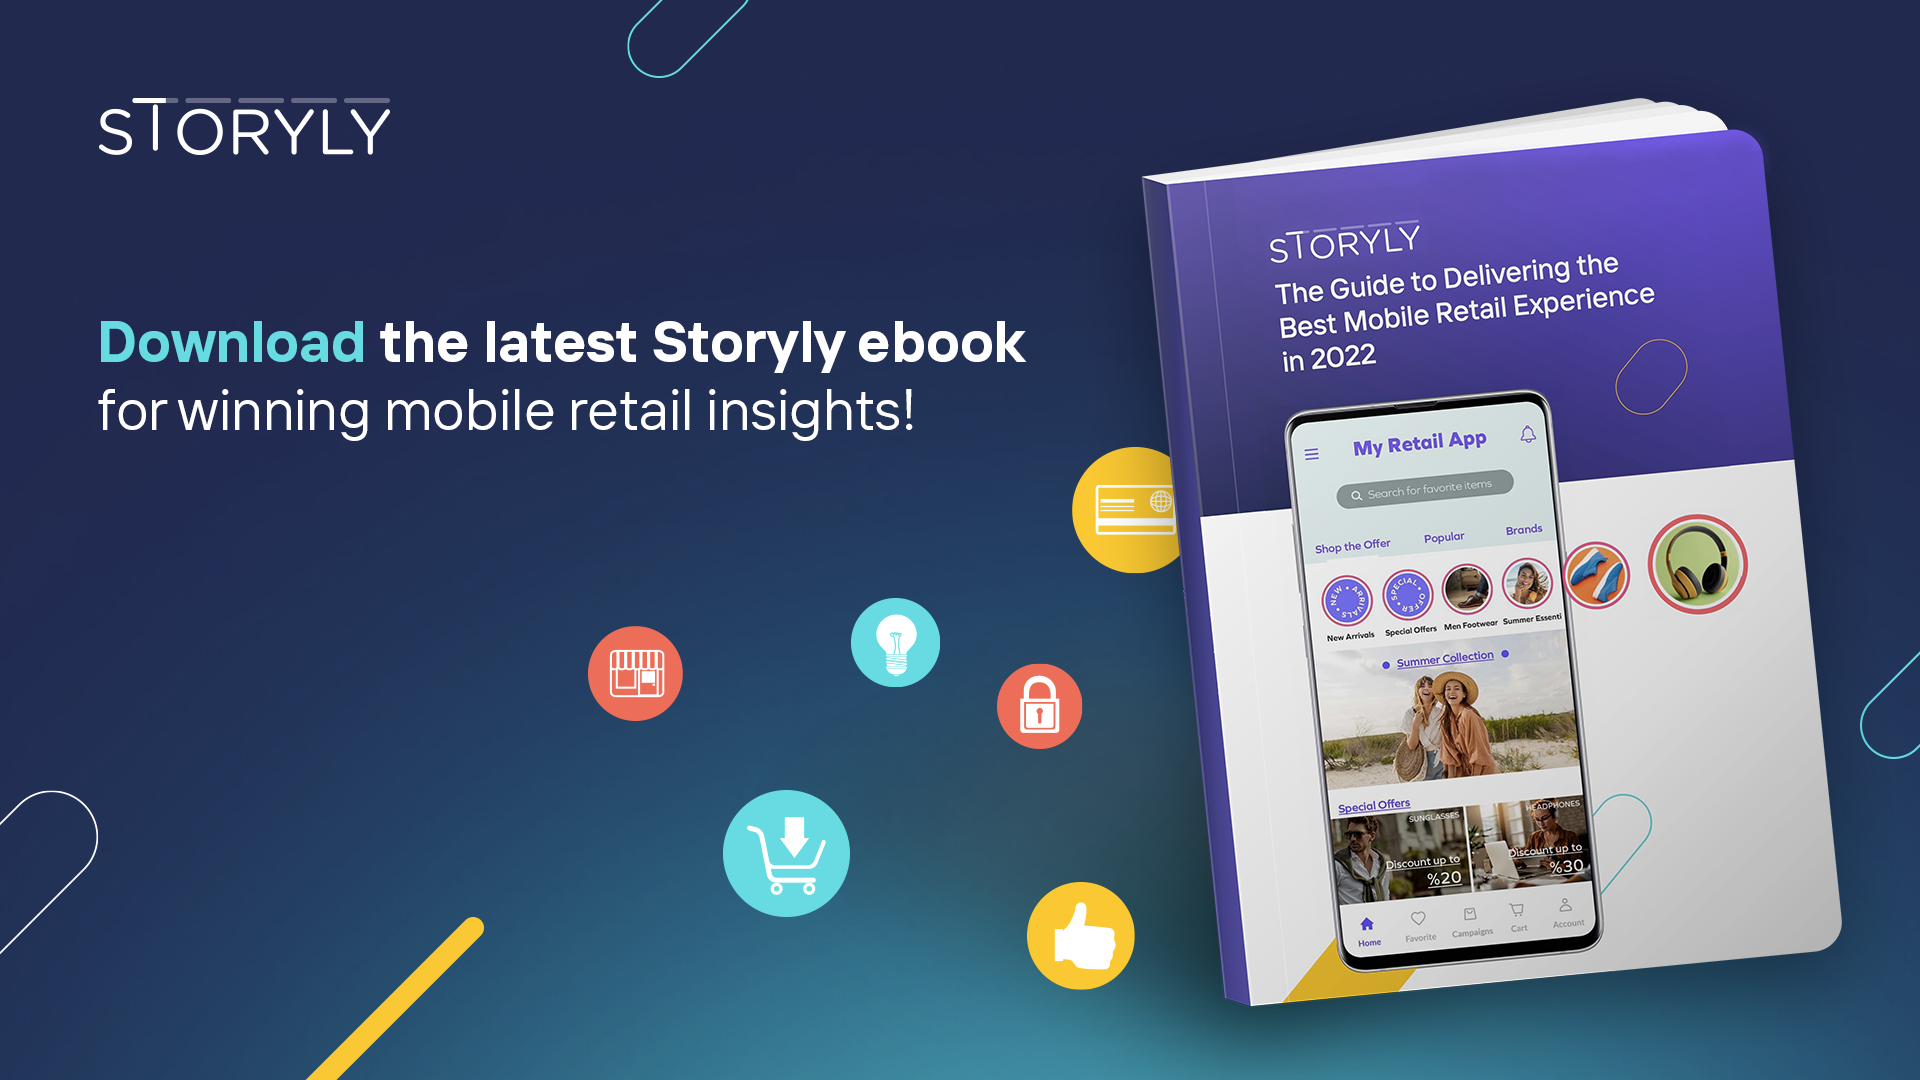 New e-Book from Storyly Offers Guidance to the Future of Digital Marketing in the Mobile Retail Landscape